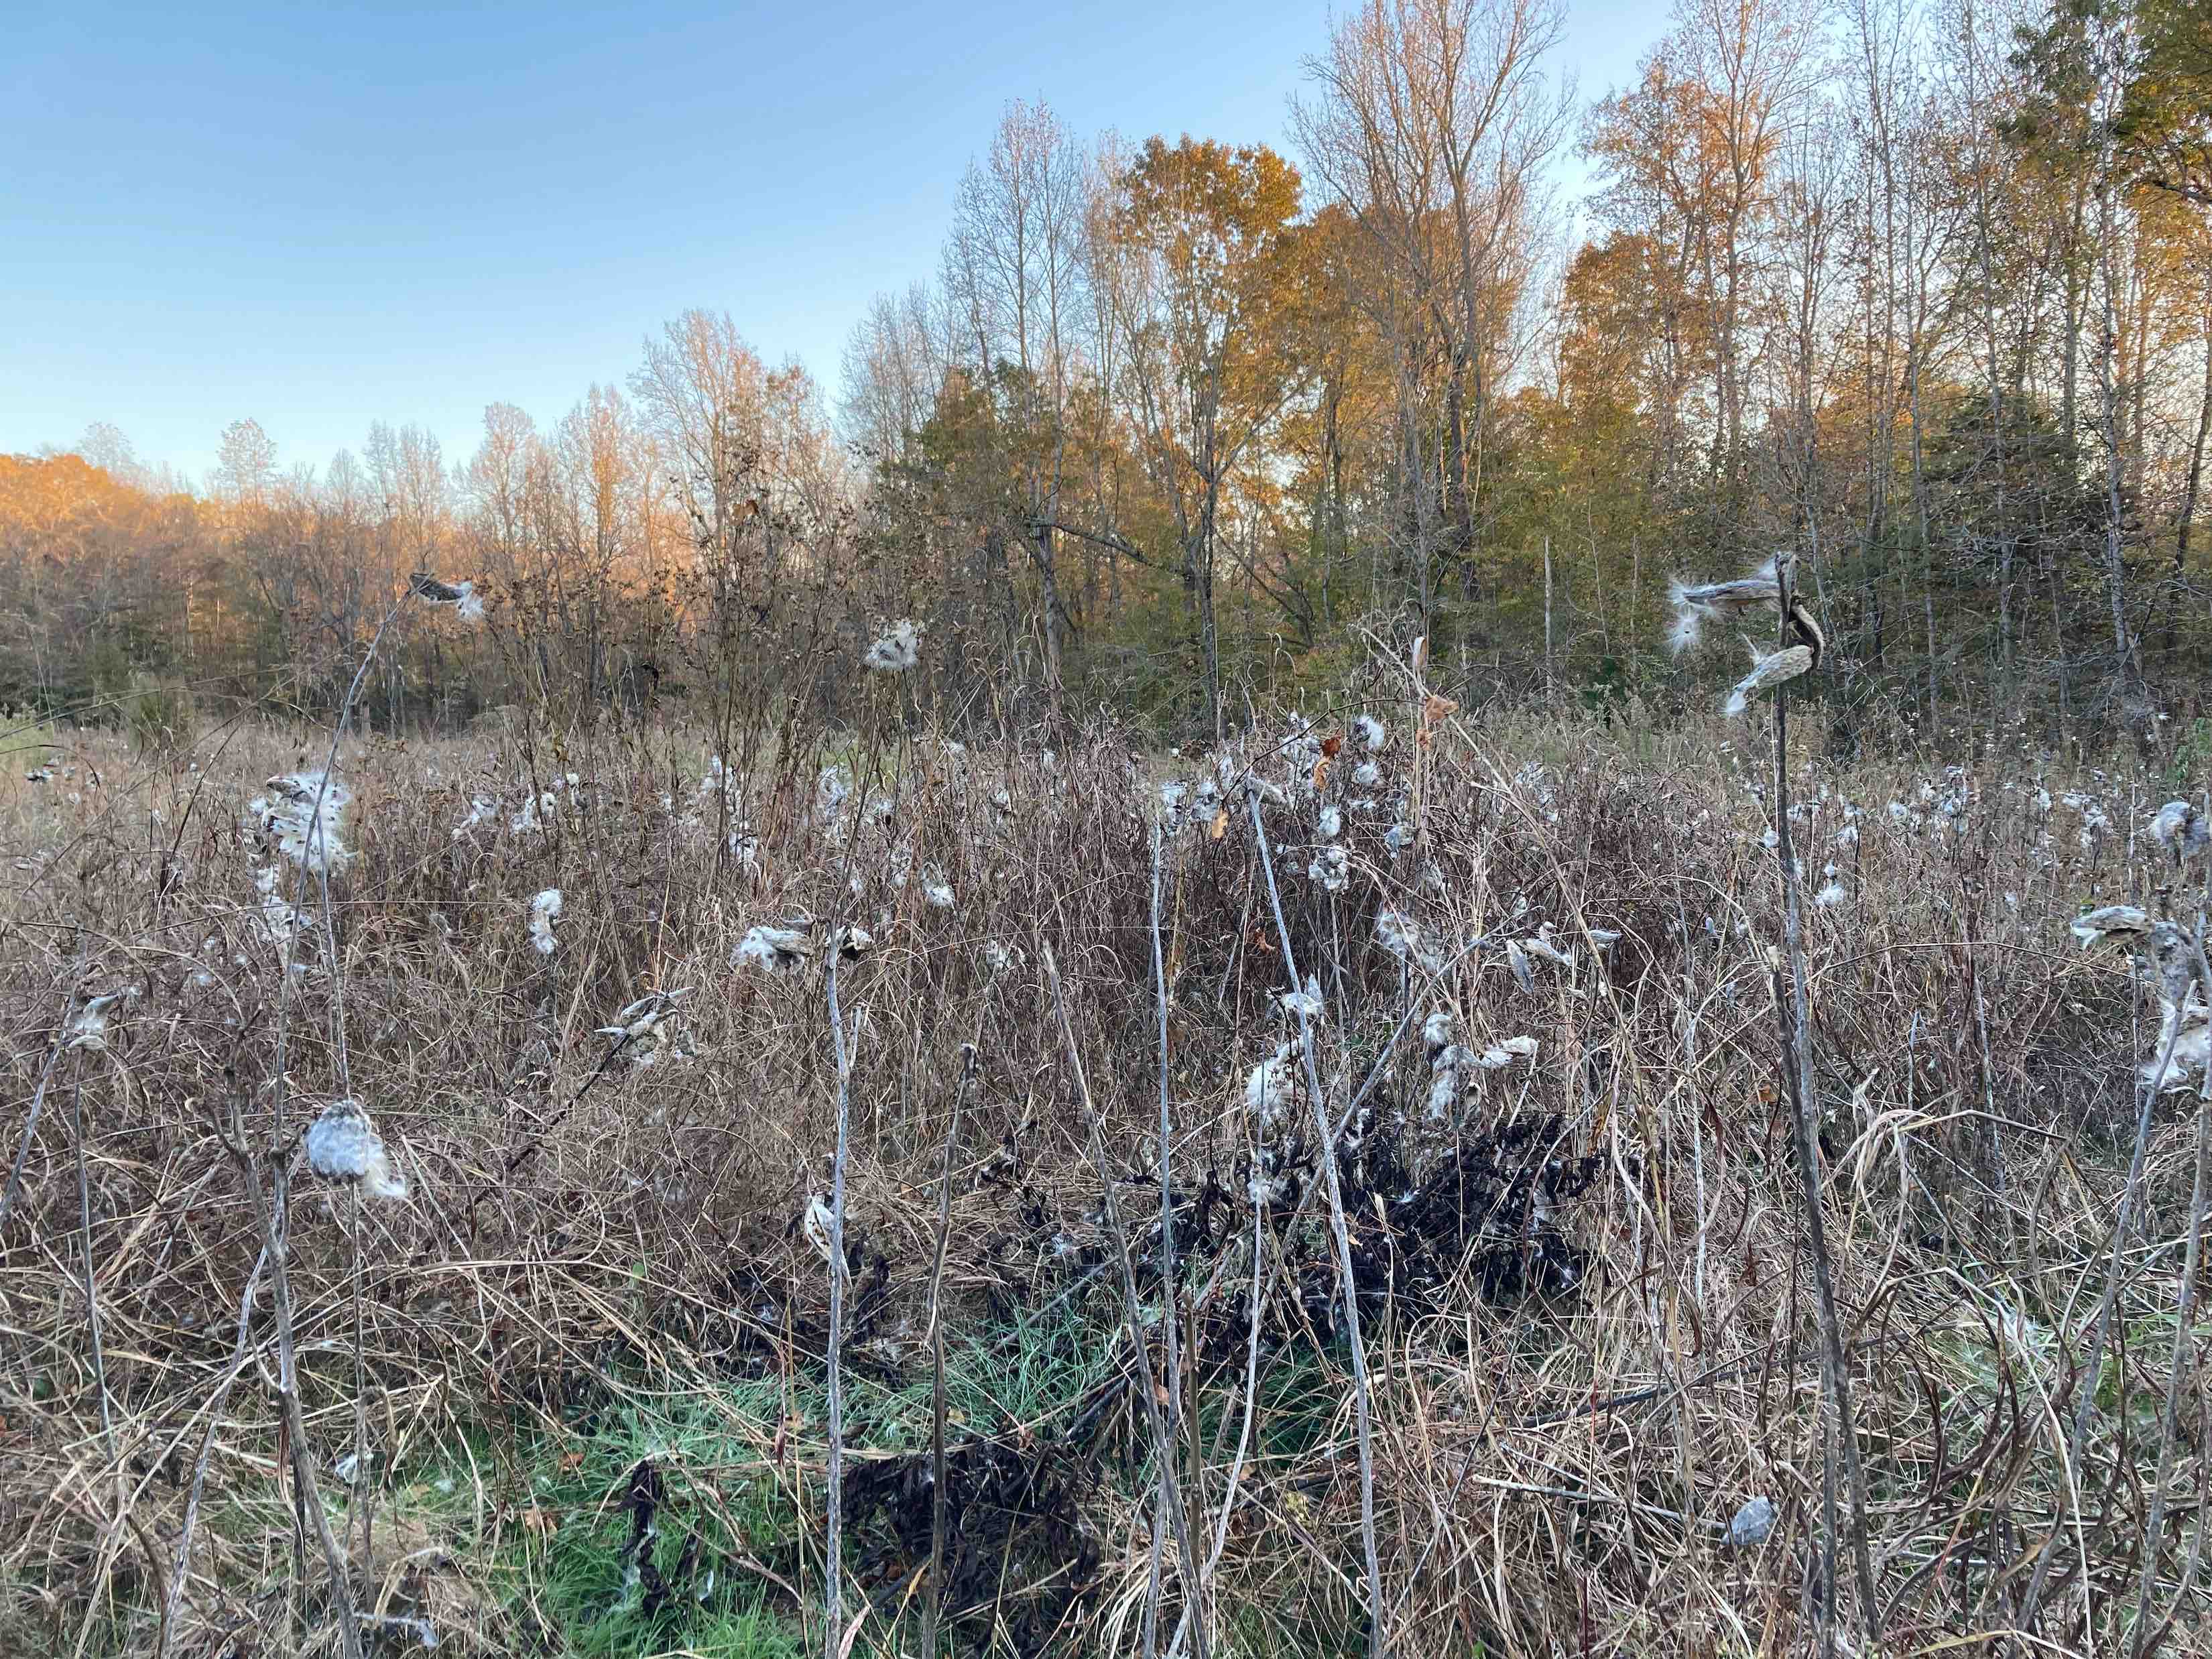 The Scientific Name is Asclepias syriaca. You will likely hear them called Common Milkweed. This picture shows the A field of senesced <em>Asclepias syriaca</em> dispersing its seeds. of Asclepias syriaca